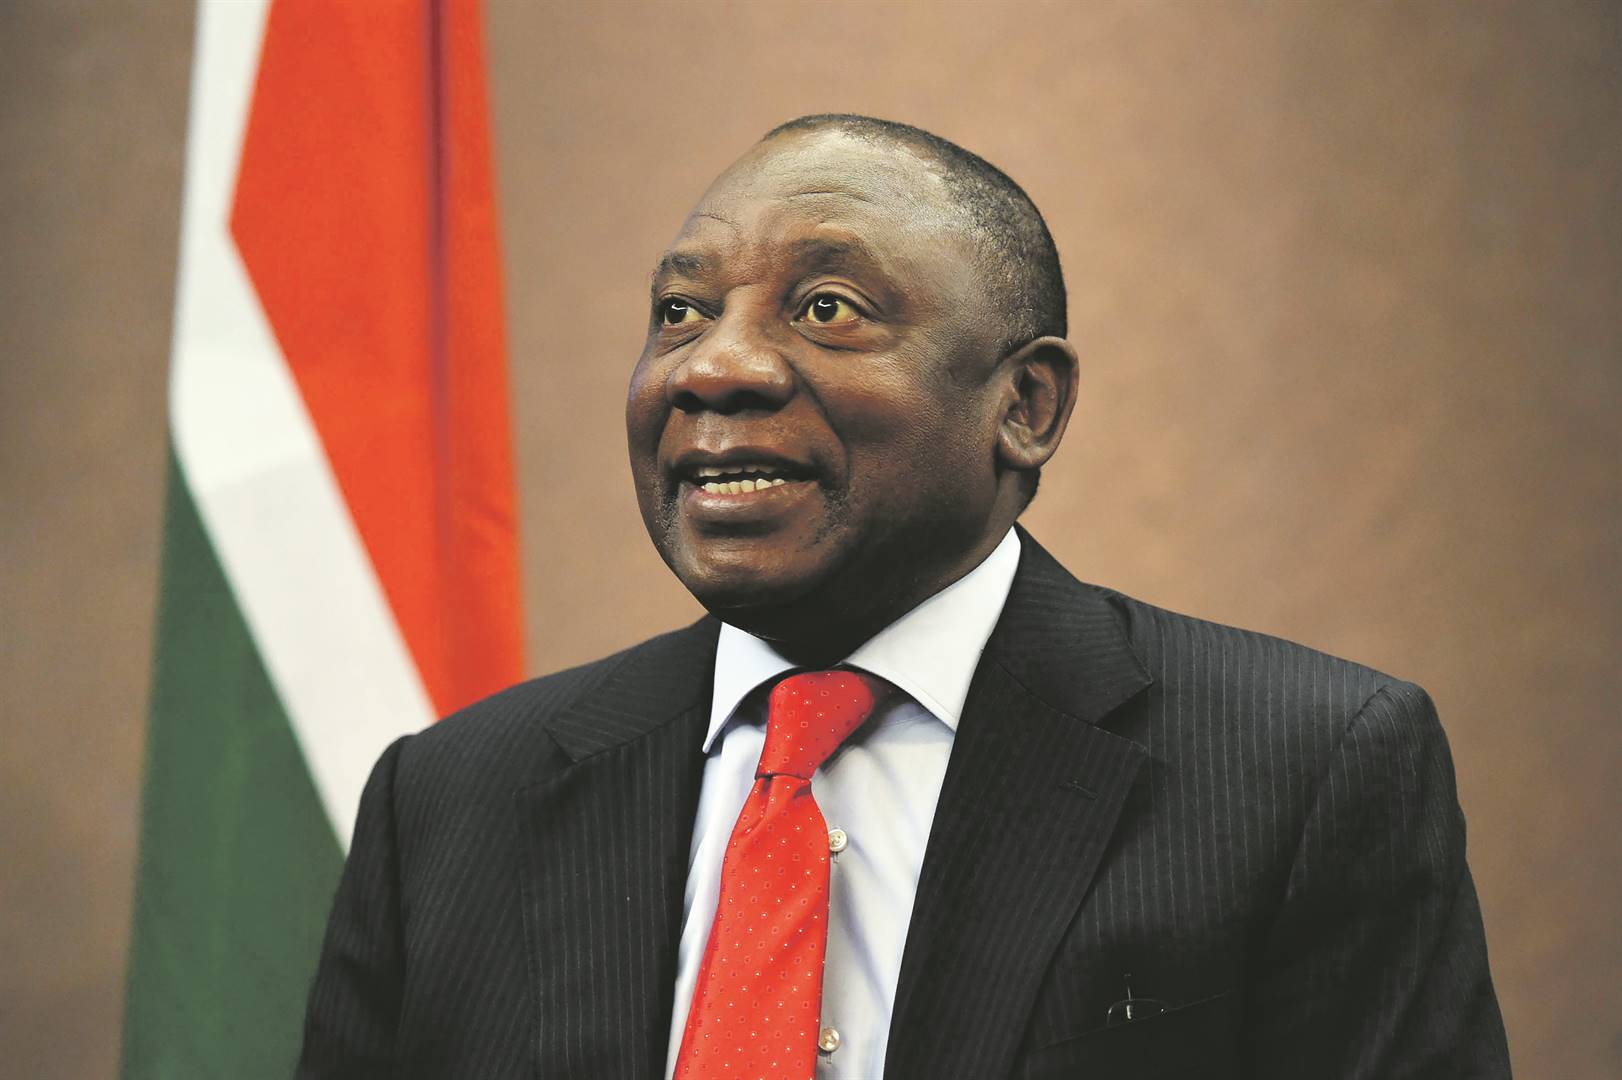 The party has submitted a 90-page response to the Public Protector’s interim report, which found in favour of Ramaphosa.